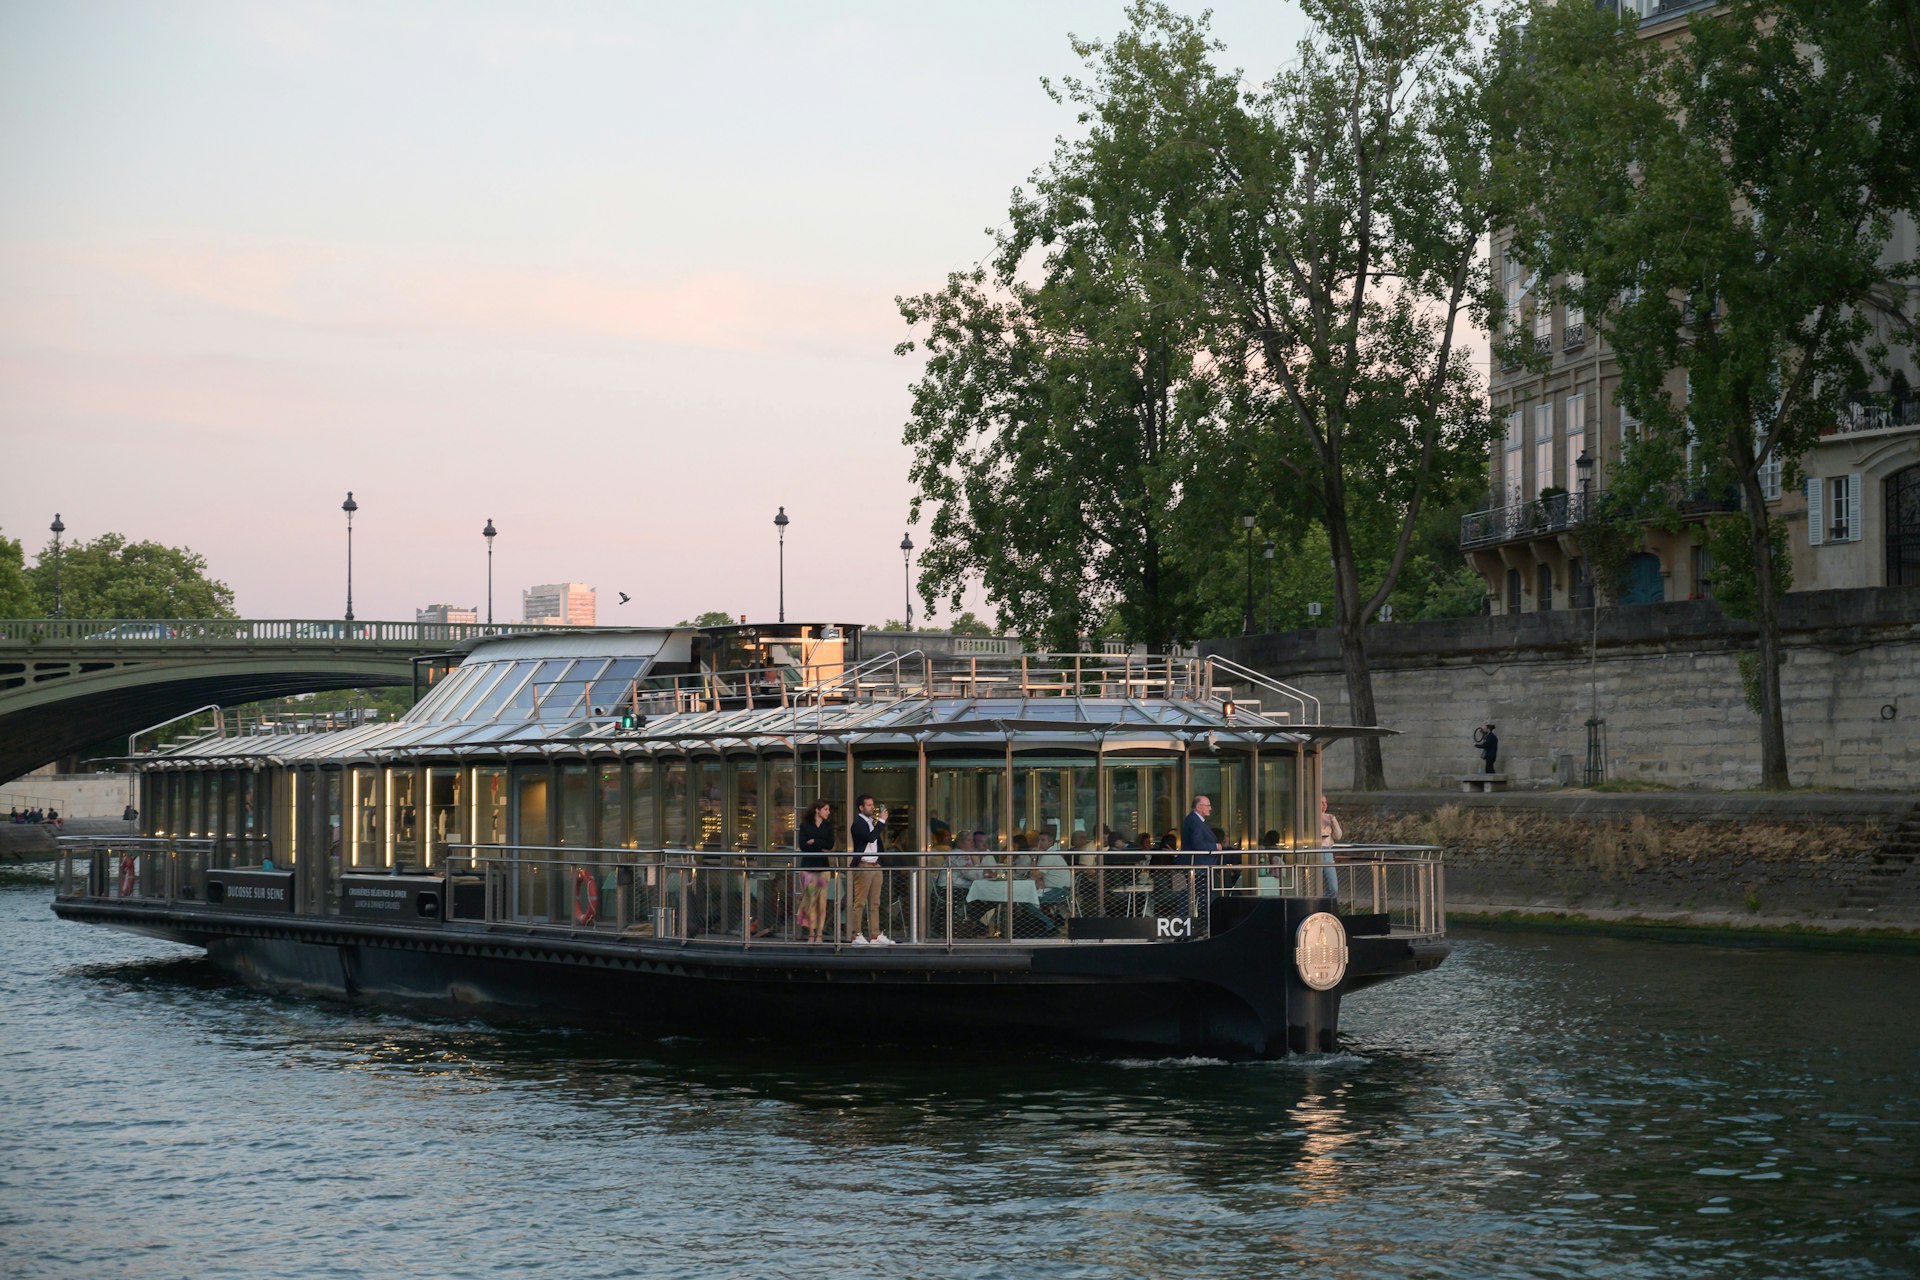 Some people are standing out on the deck of the Ducasse sur Seine, a floating restaurant, as it glides down the River Seine at dusk.